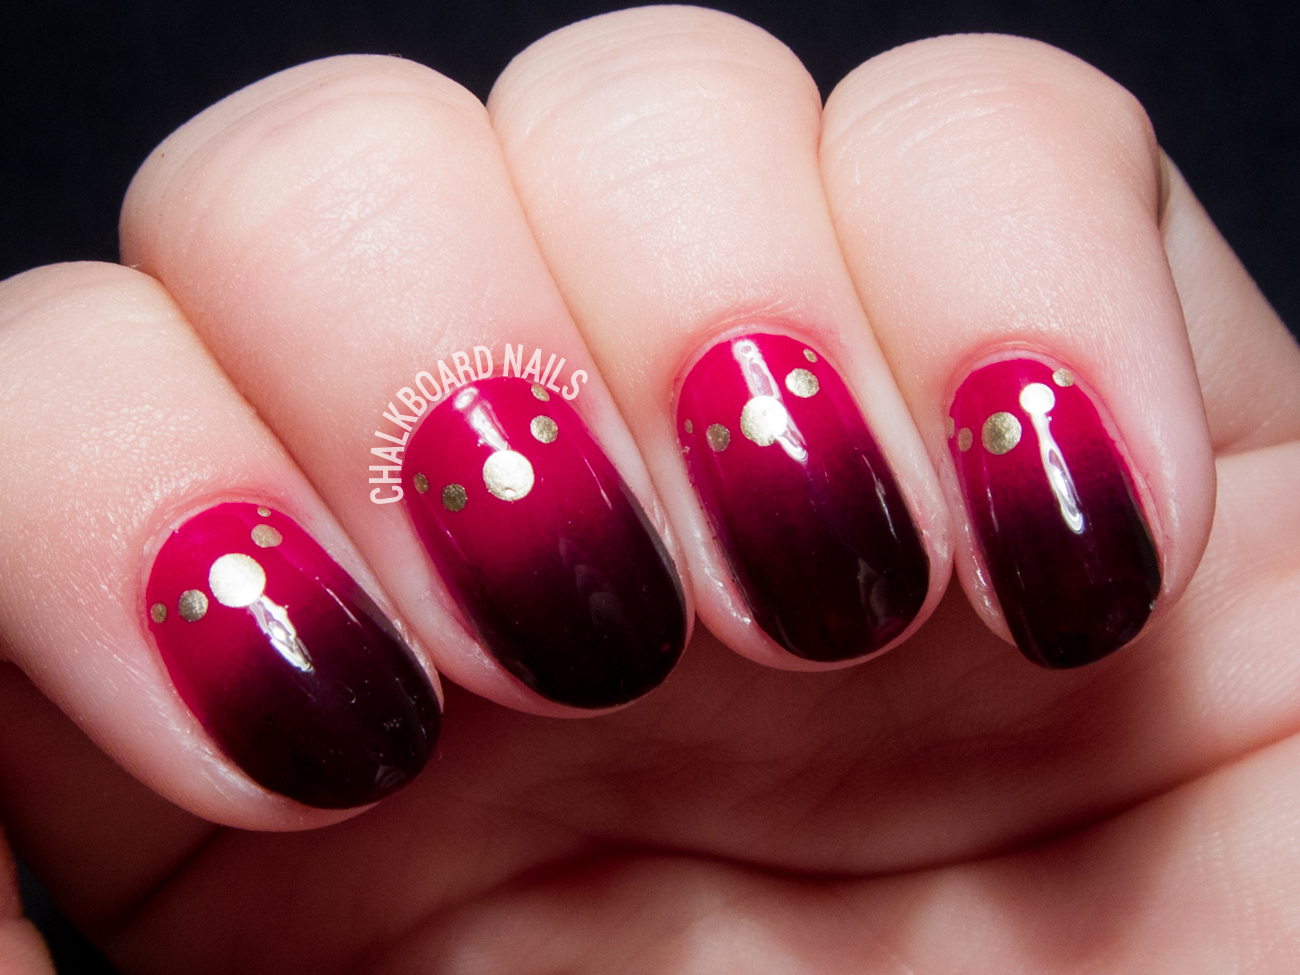 Bordeaux gradient with jewelry half moons by @chalkboardnails